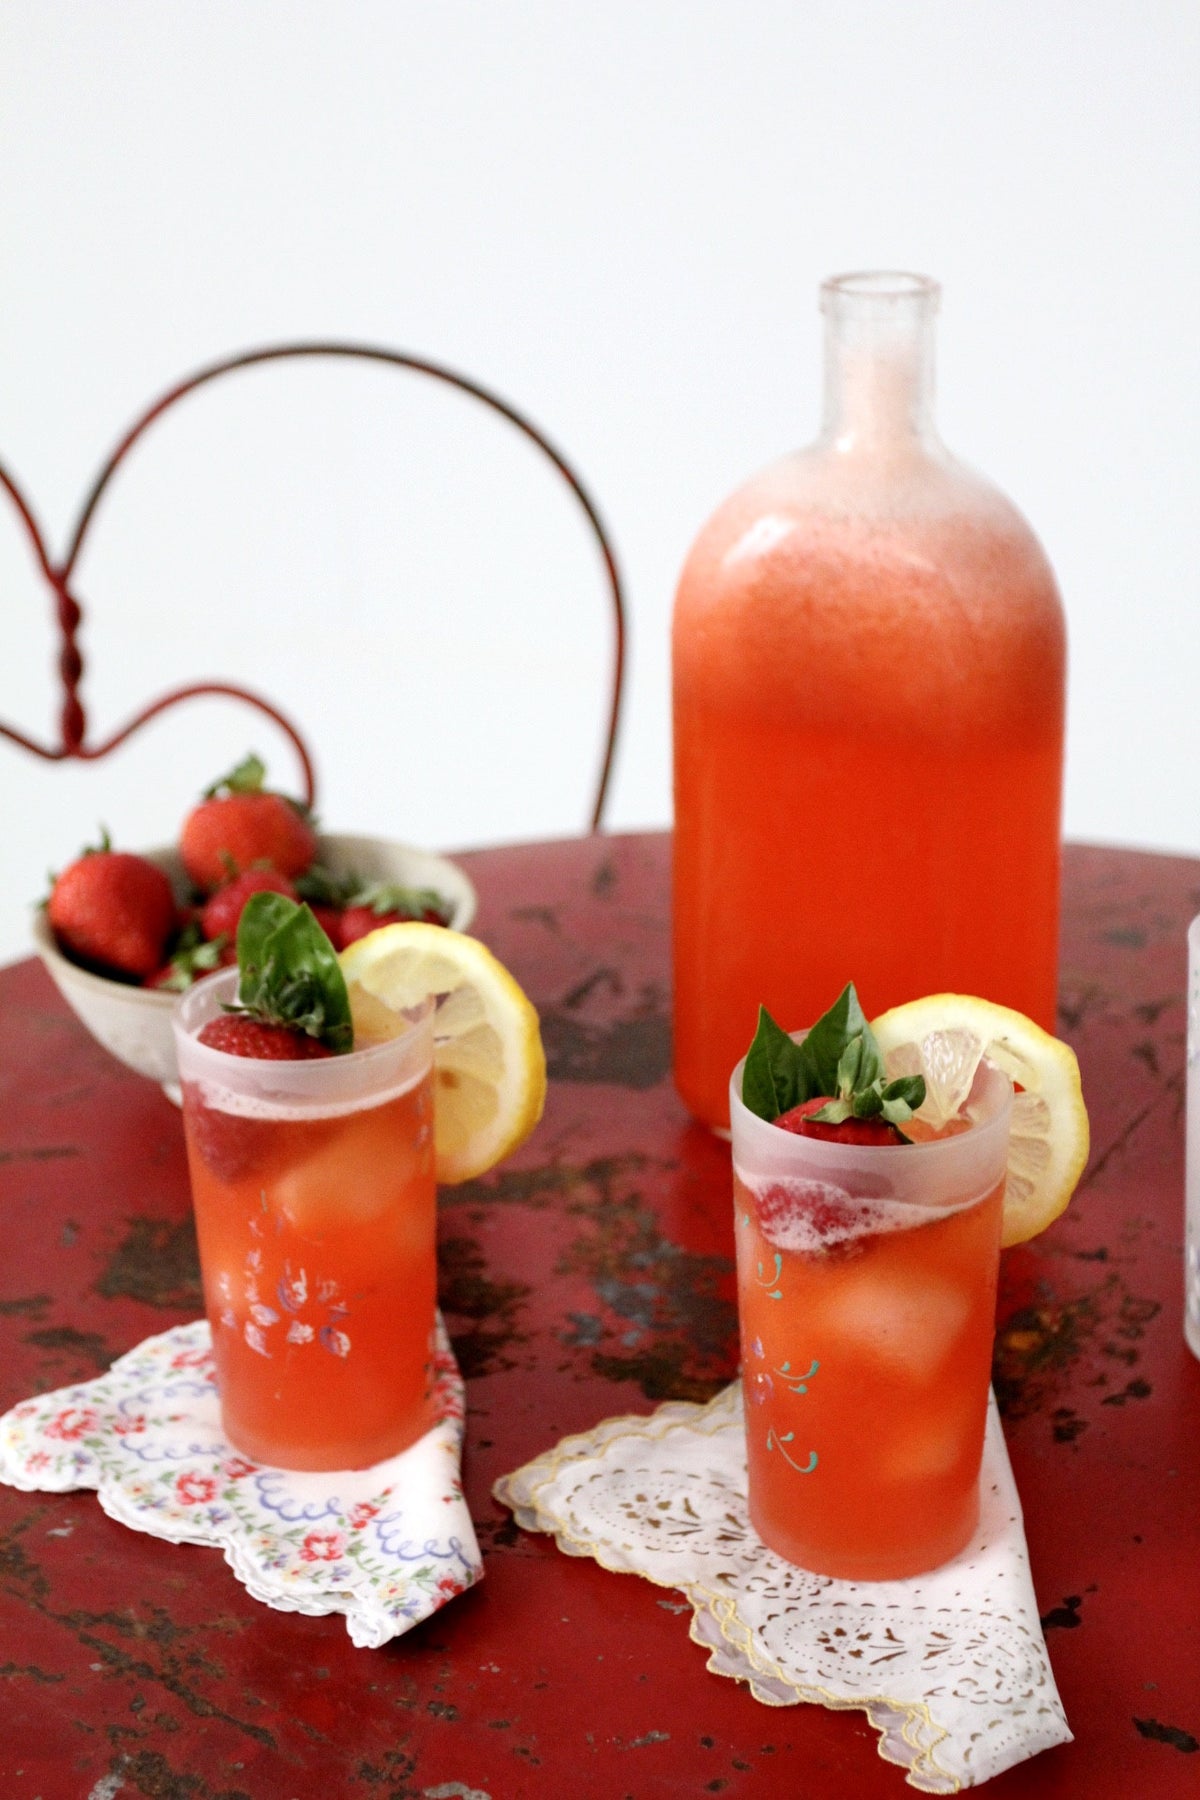 Summer Refresh! Strawberry Lemonade to the Rescue